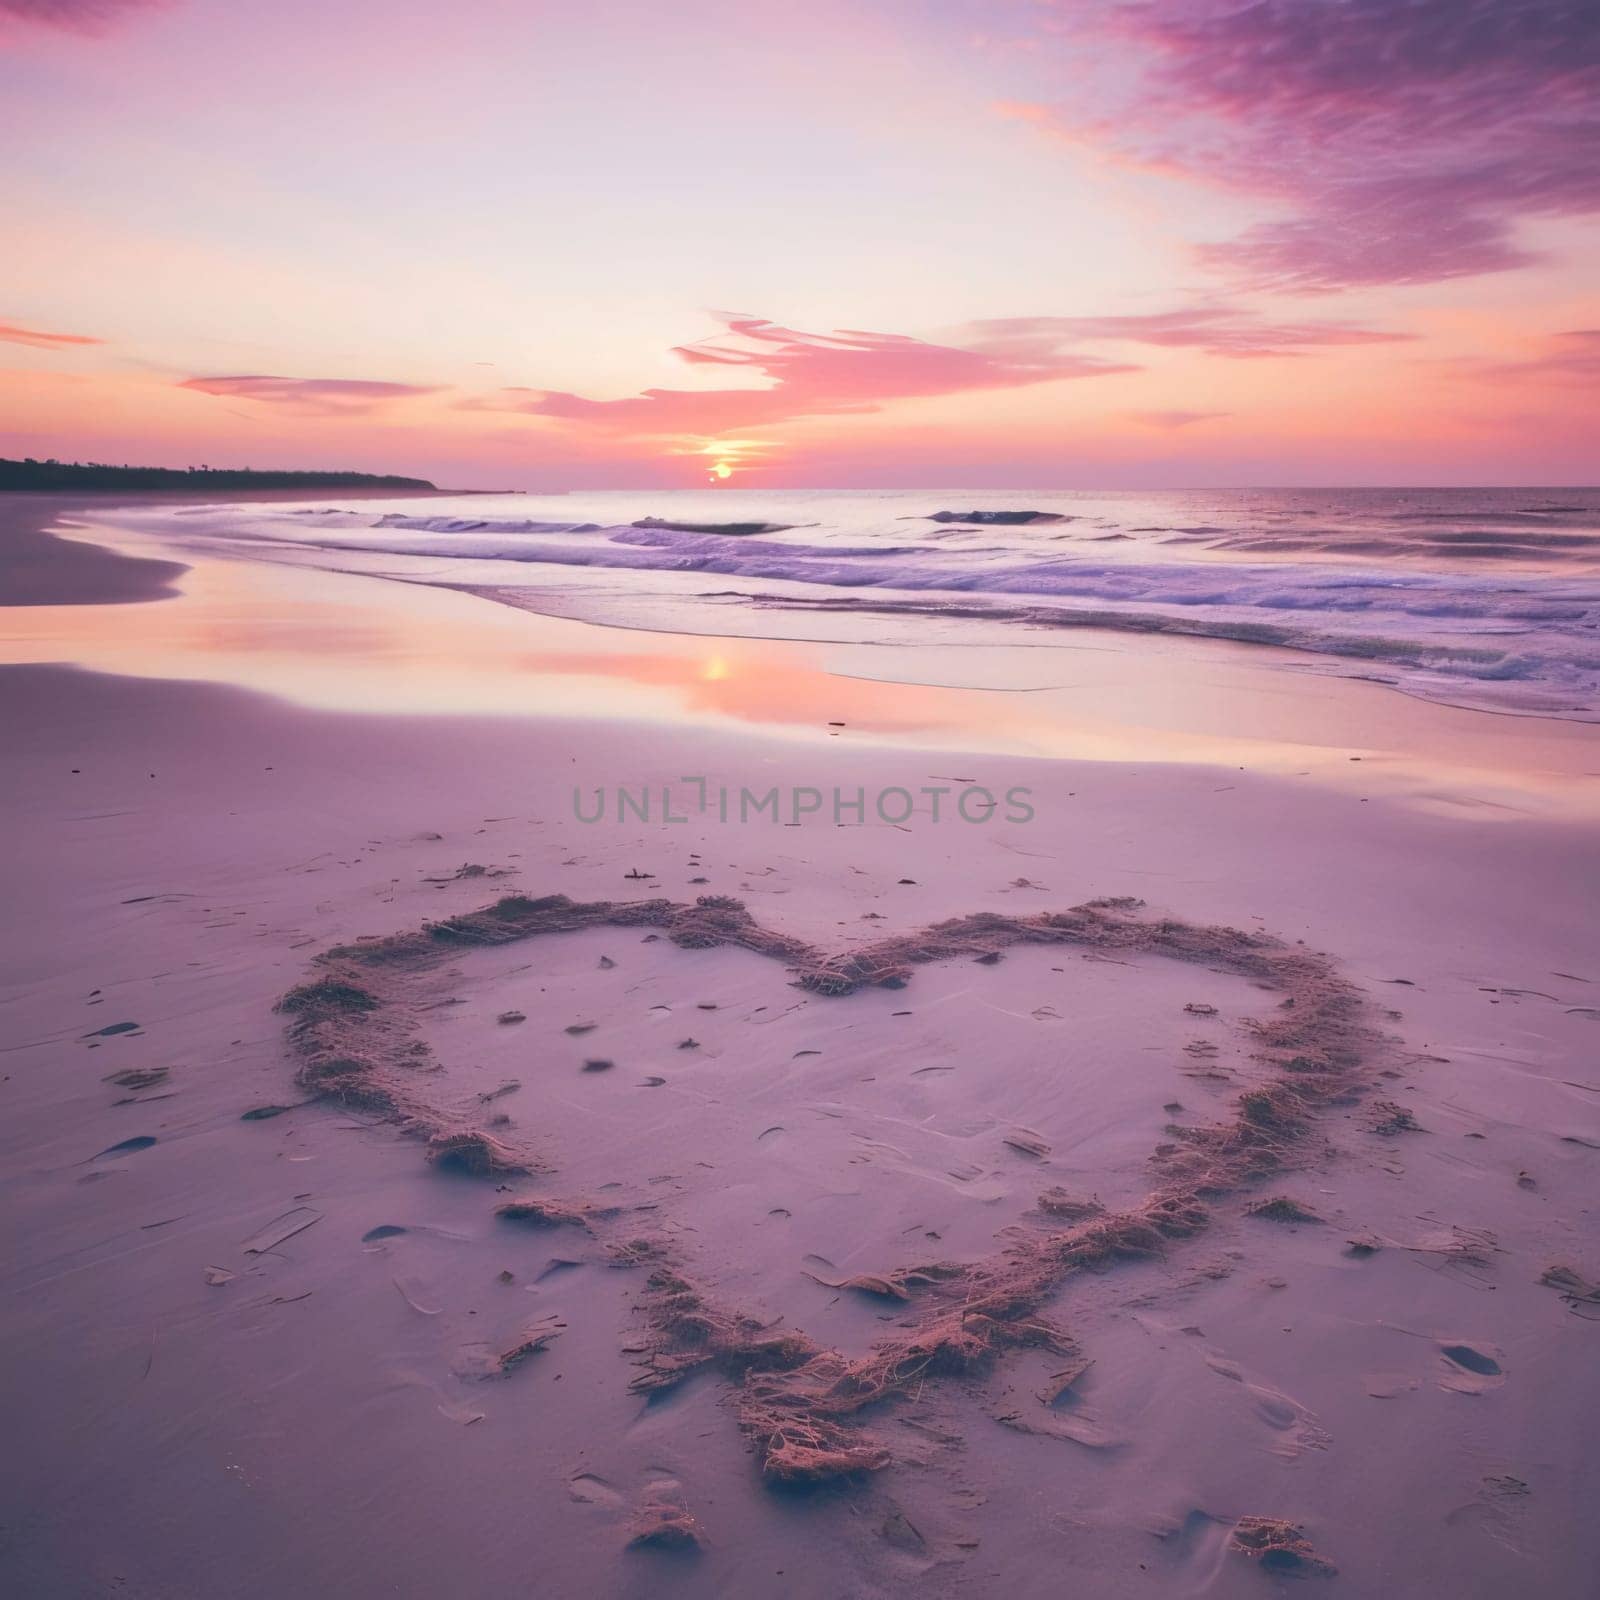 Placed on the sand on the beach at sunset heart. Heart as a symbol of affection and love. The time of falling in love and love.